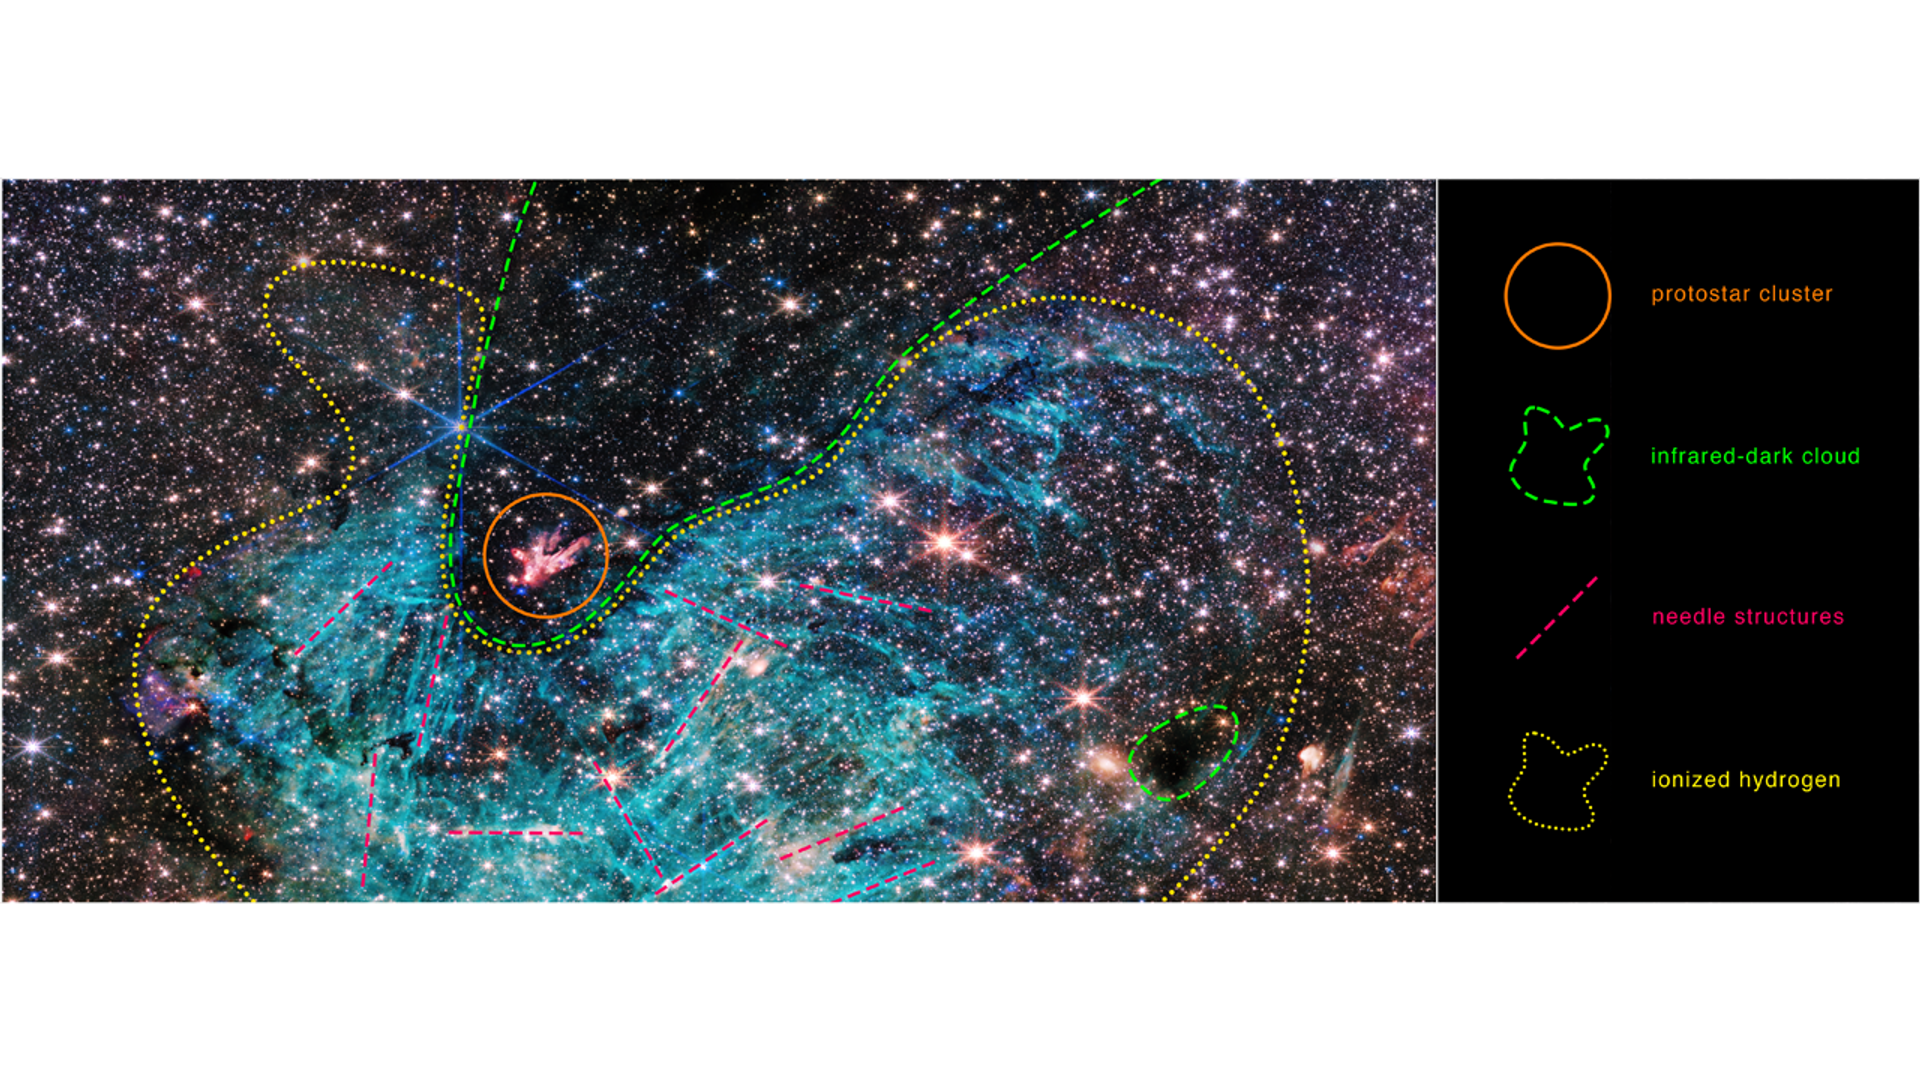 In the image of space, the yellow dotted line forms a fat U shape, surrounding a cyan-colored area that is much wider on its right-hand side. Within this area, straight red dotted lines indicate structures within the ionized hydrogen, oriented chaotically in multiple directions. Fitting into the curve of the U shaped ionized hydrogen region, the dashed-line of green indicates the shape of the infrared-dark cloud. At the base of the U curve the orange circle surrounds a red and white protostar cluster appearing to spray upward and to its left. To the right of the ionized hydrogen region, a small dark area is surrounded by a dashed-green line, highlighting another infrared-dark cloud. - Sputnik International, 1920, 21.11.2023